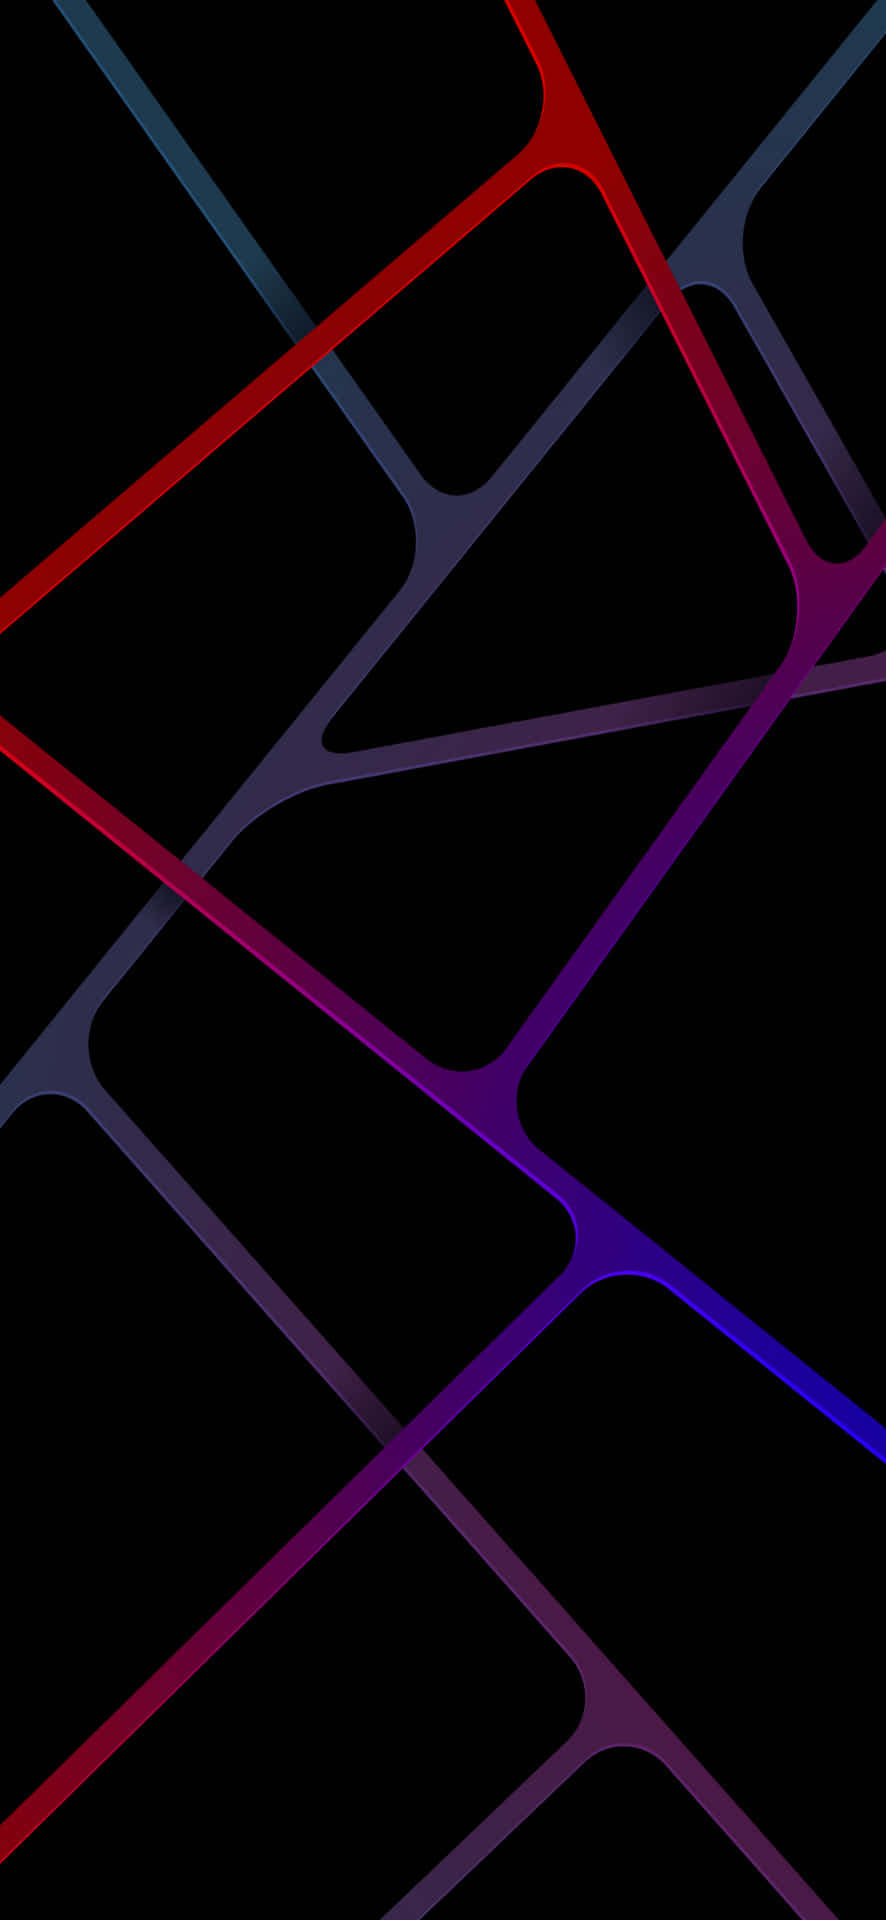 A vibrant Amoled background for the Google Pixel 3xl.